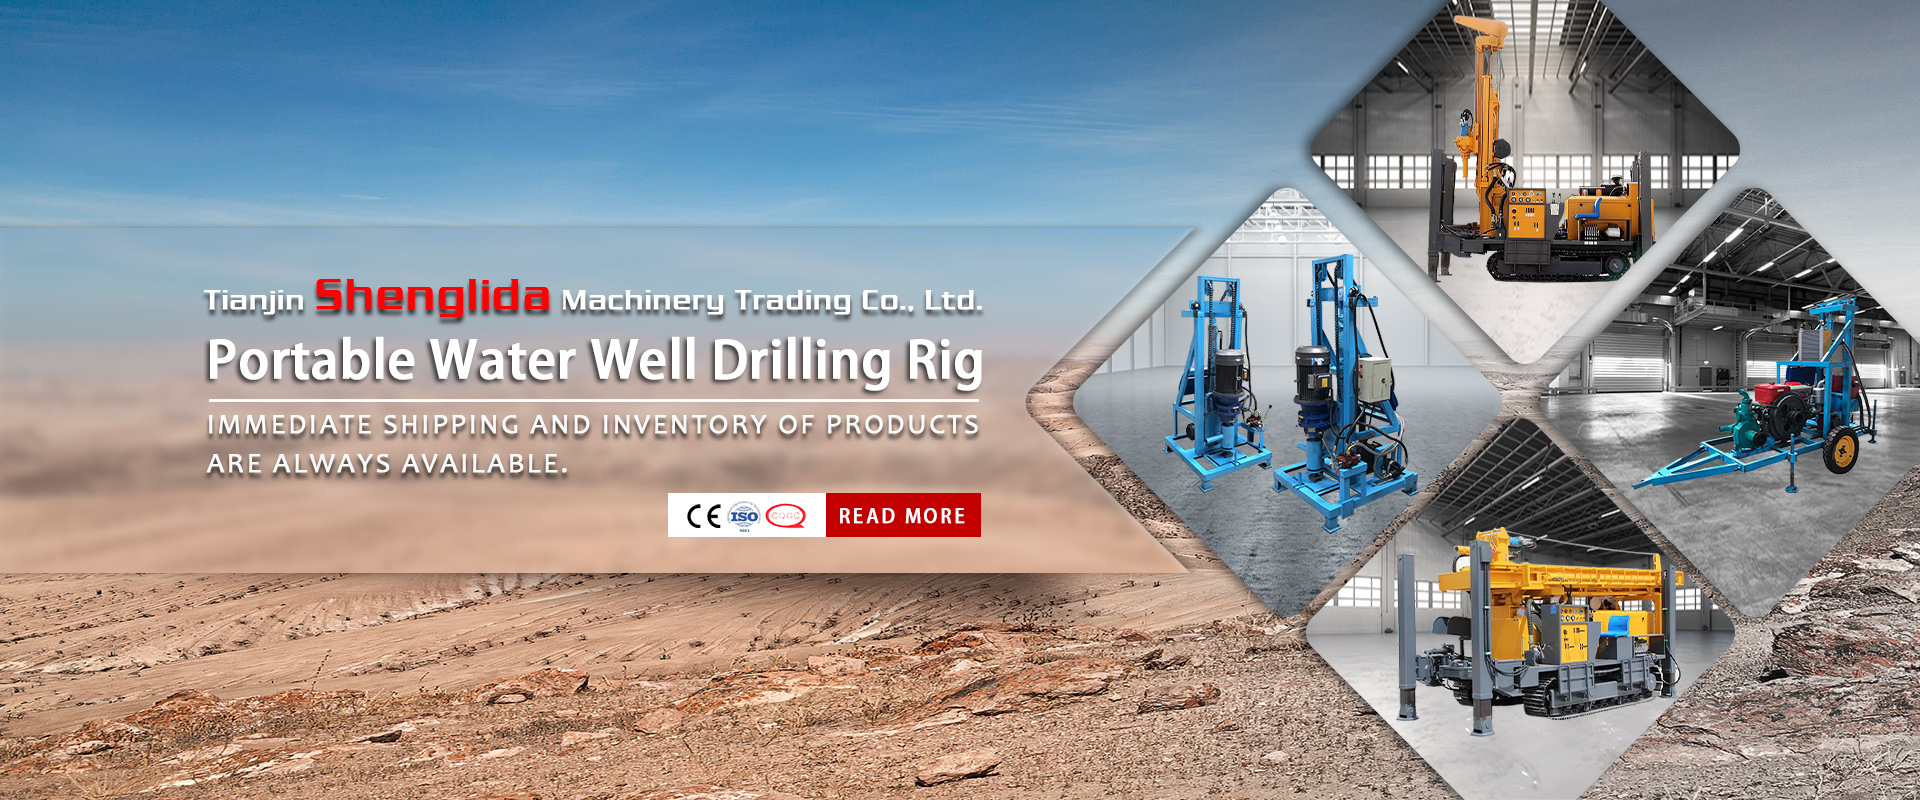 shenglida water well drilling rig banner